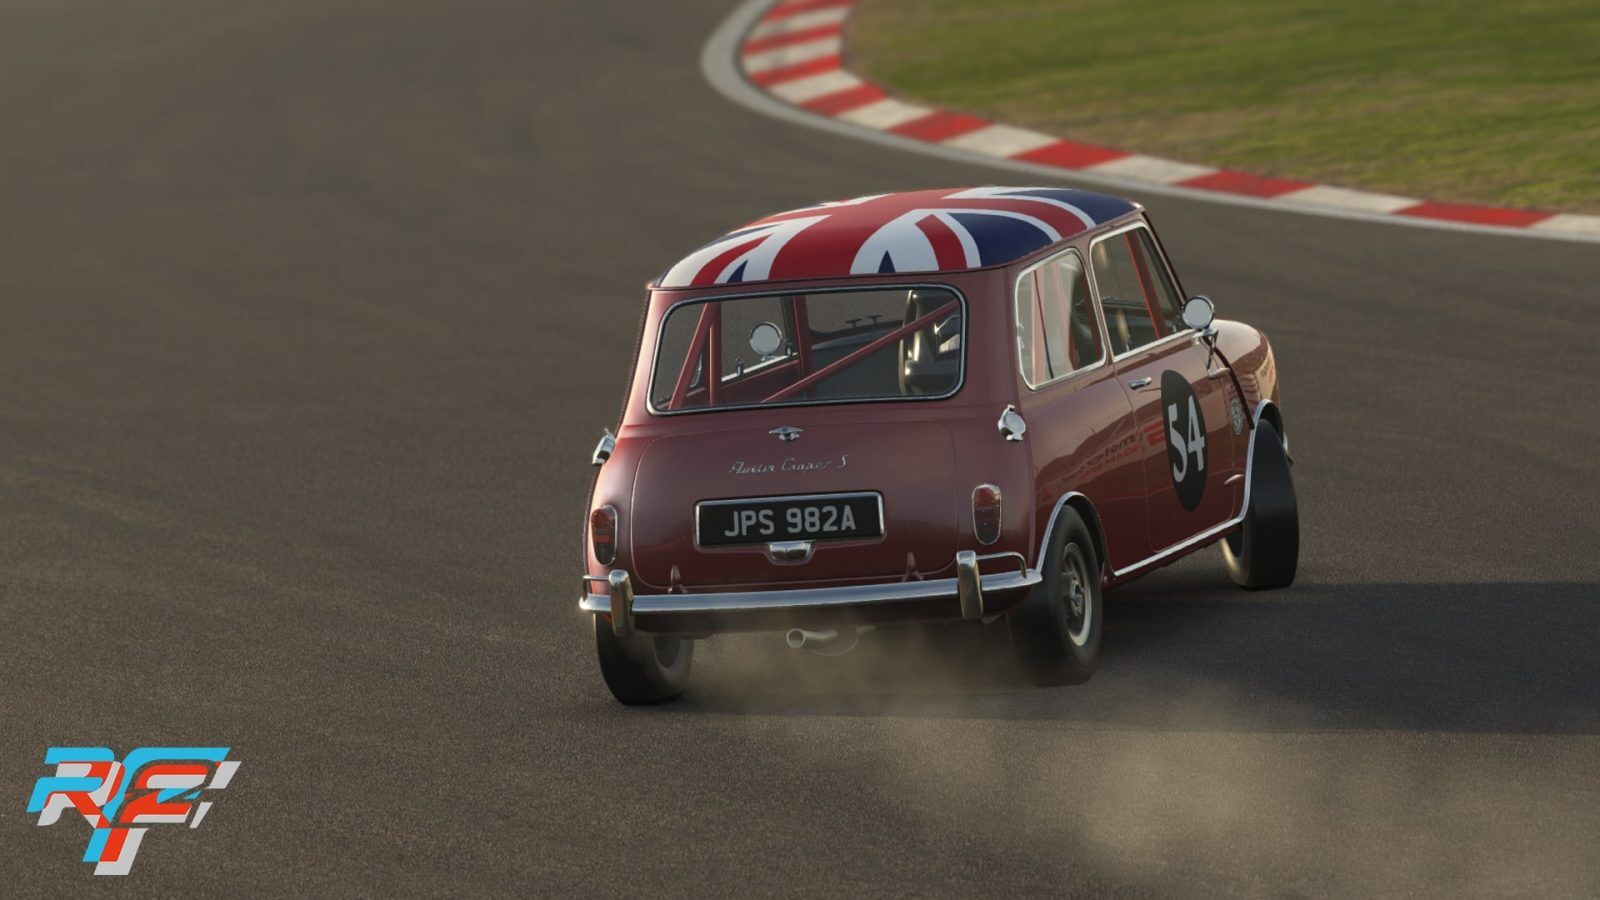 An image of the Austin Mini Cooper S in rFactor 2.